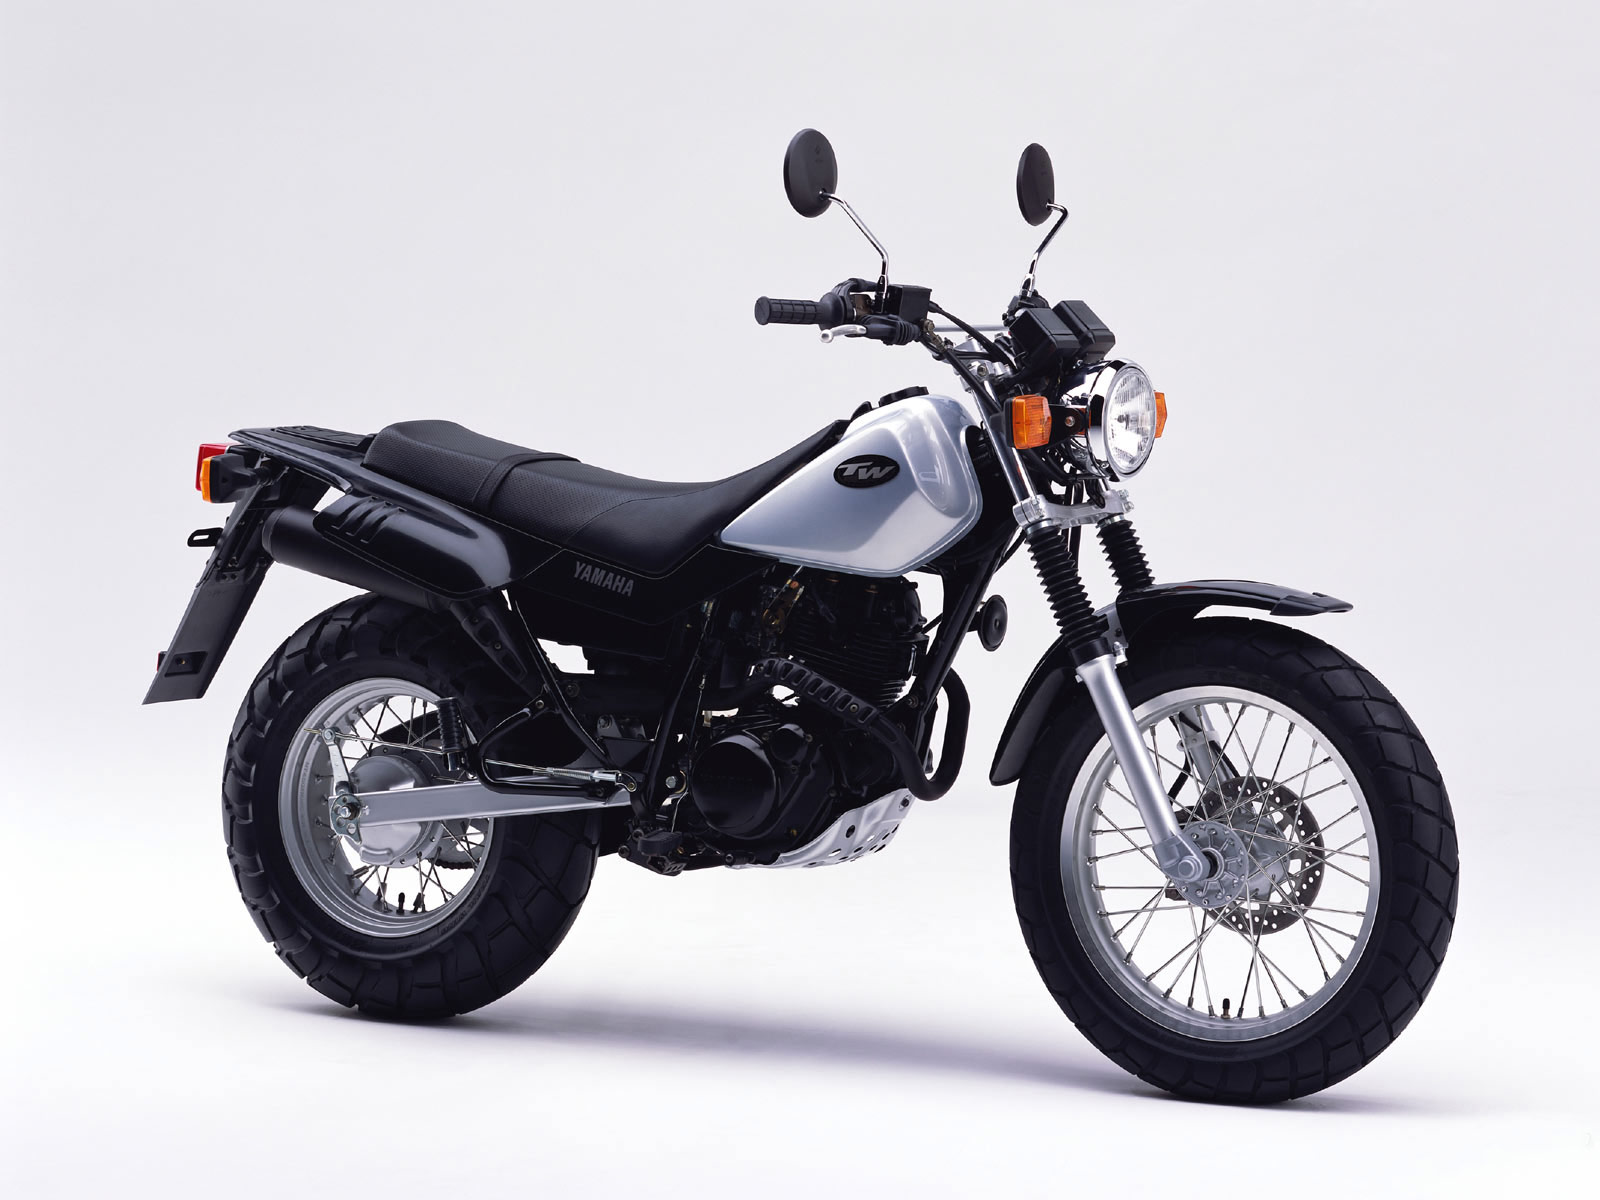 Yamaha pictures and specifications, motorcycle, scooter, ATV